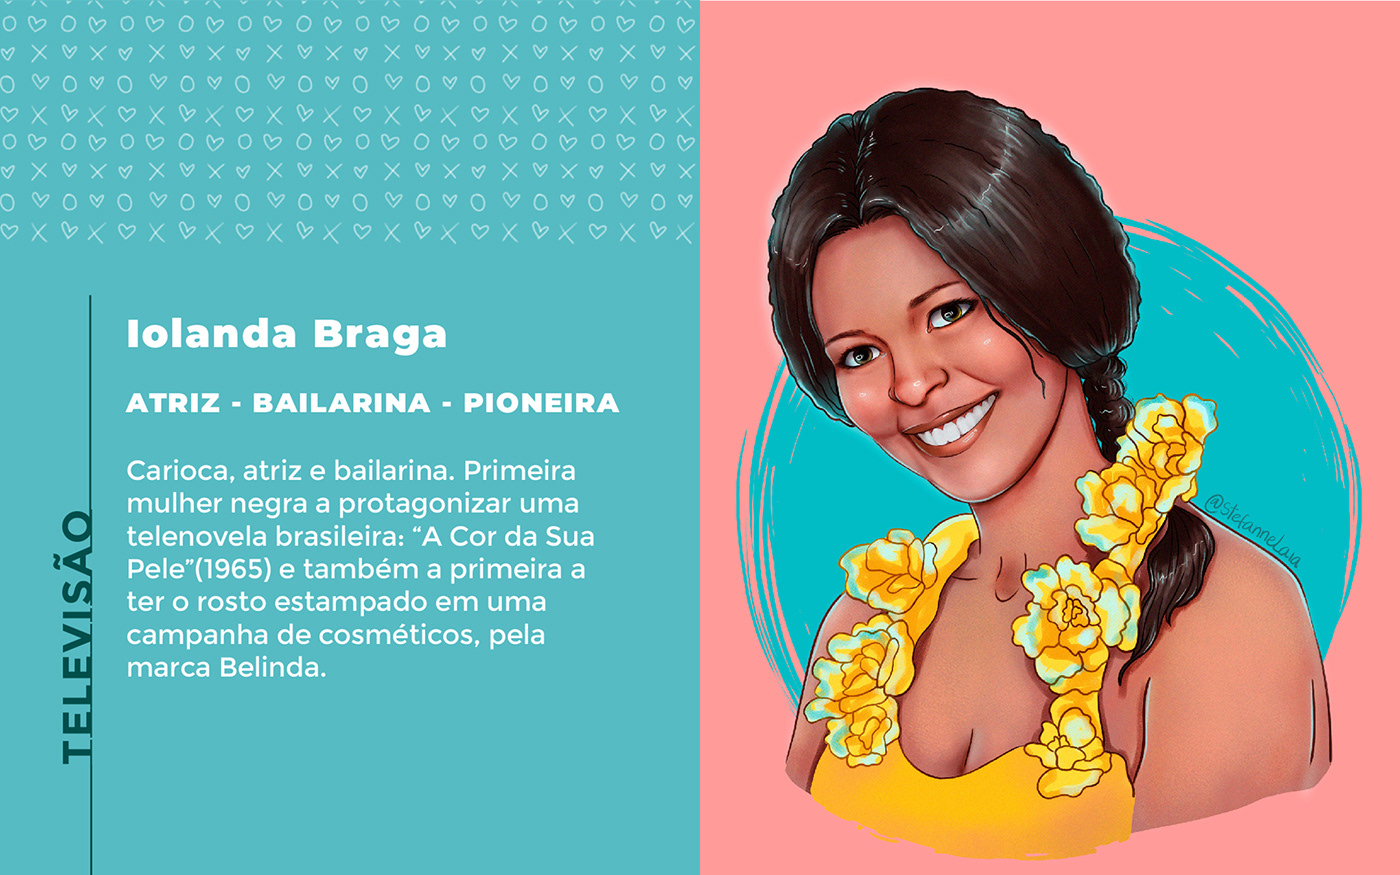 An illustrated portrait of Iolanda Braga the fist black actress to be the protagonist of a tv novel.